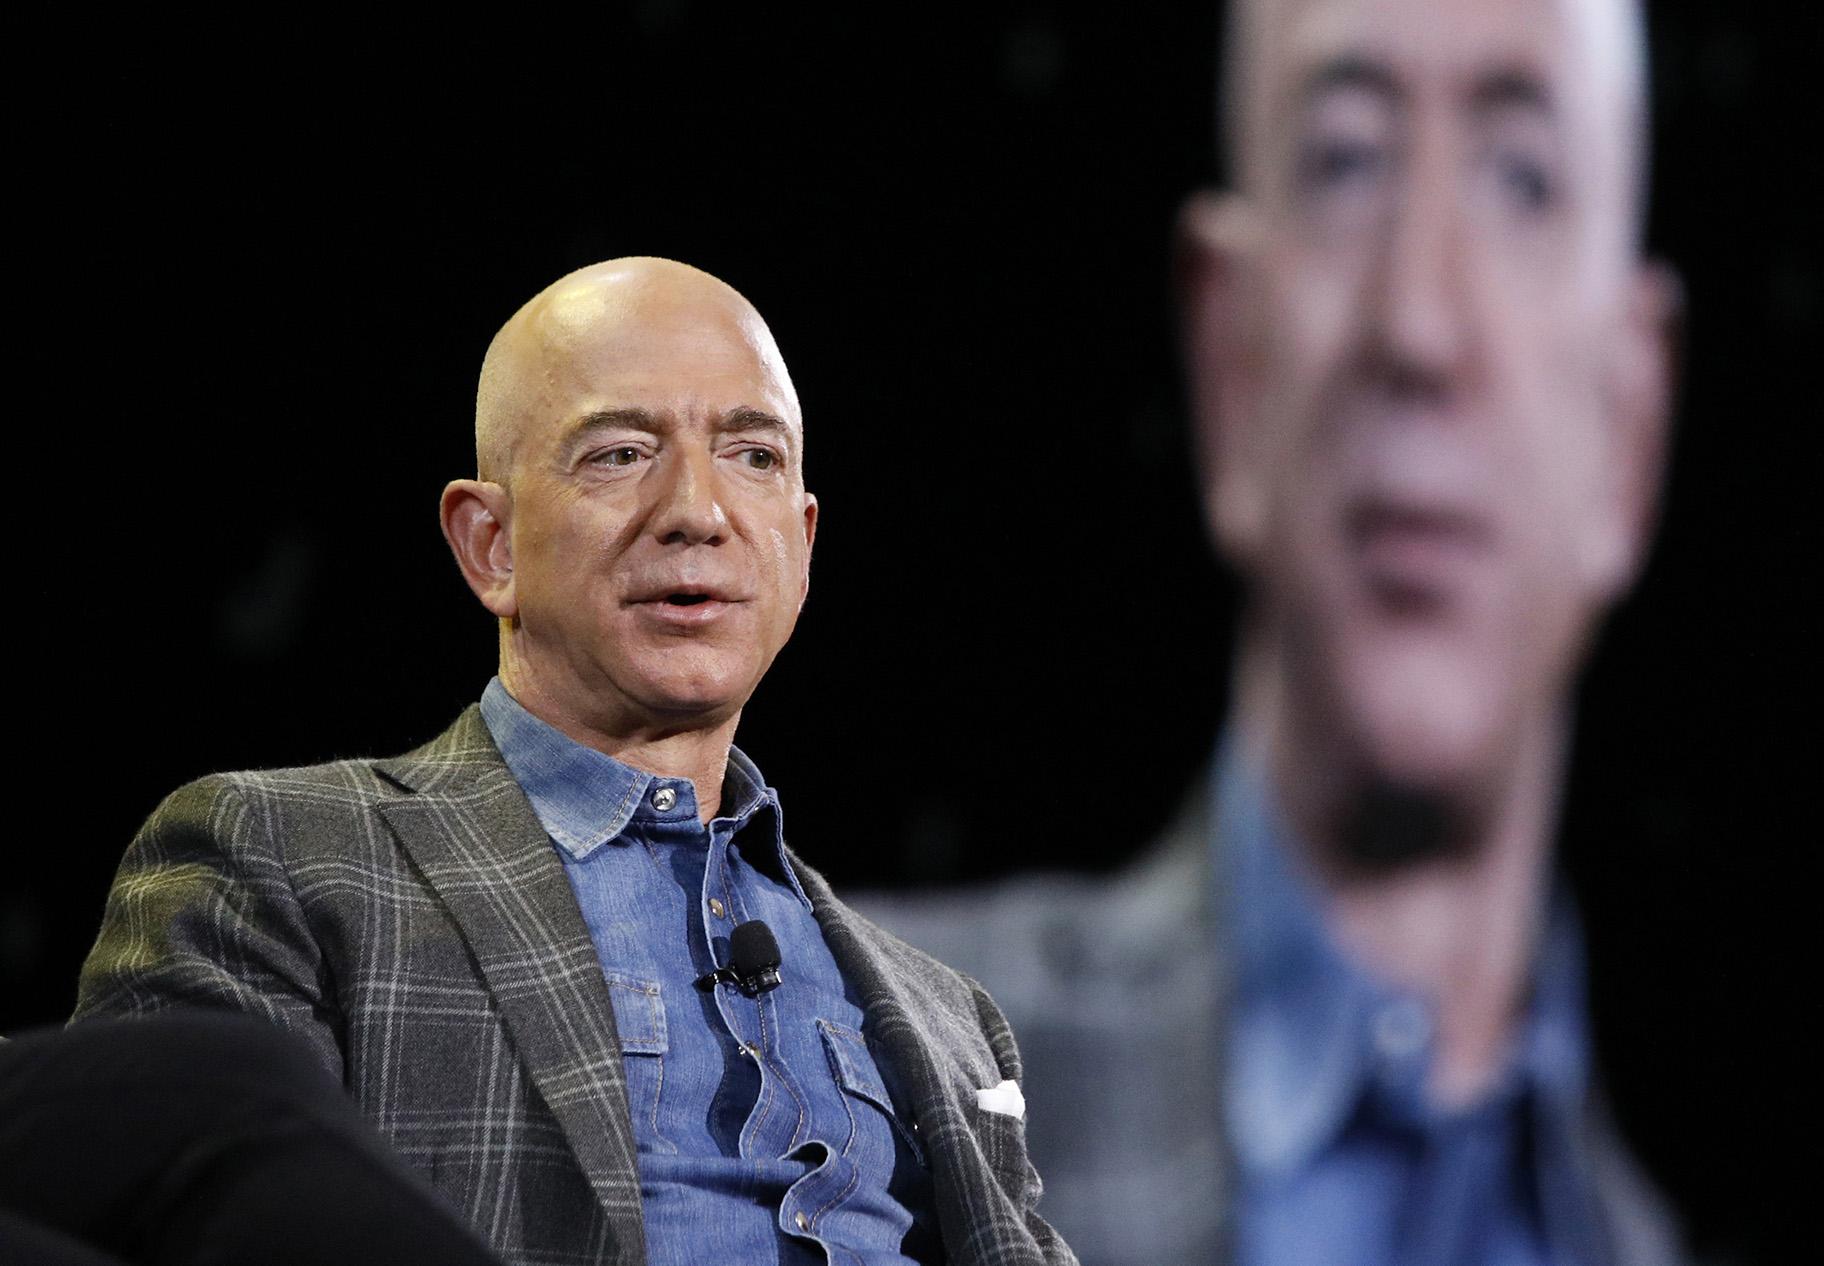 In this June 6, 2019, file photo, Amazon CEO Jeff Bezos speaks at the Amazon re:MARS convention in Las Vegas. (AP Photo / John Locher, File)